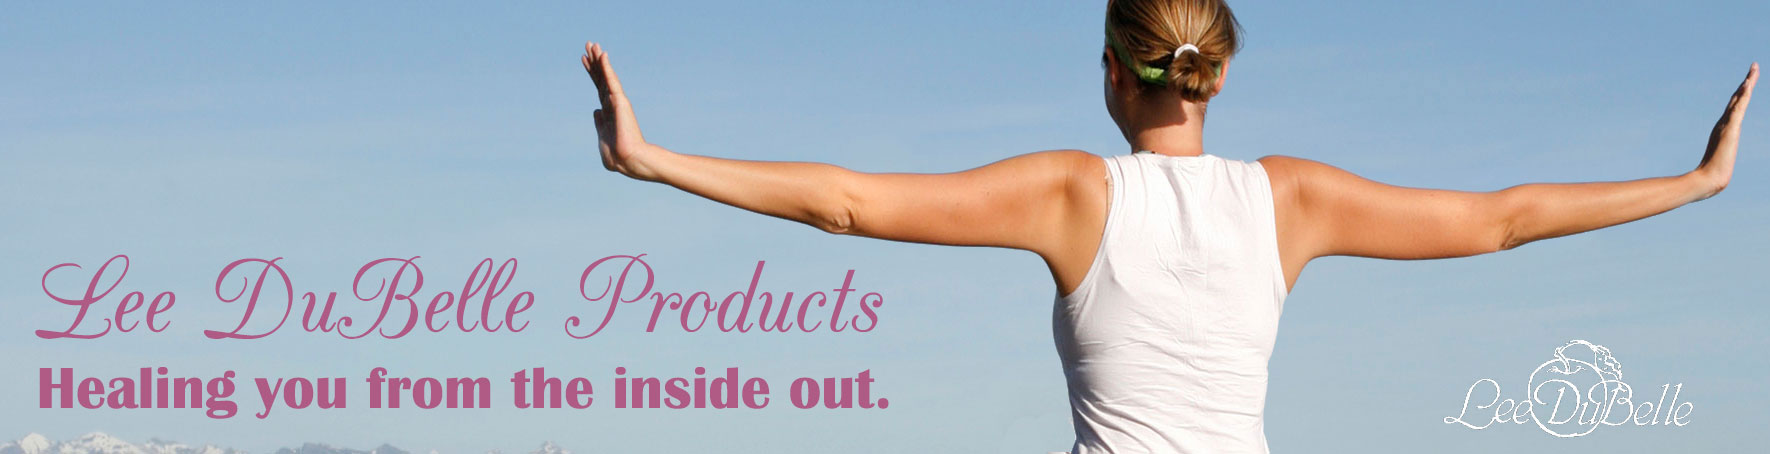 Lee Dubelle Products. Healing you from the inside out.